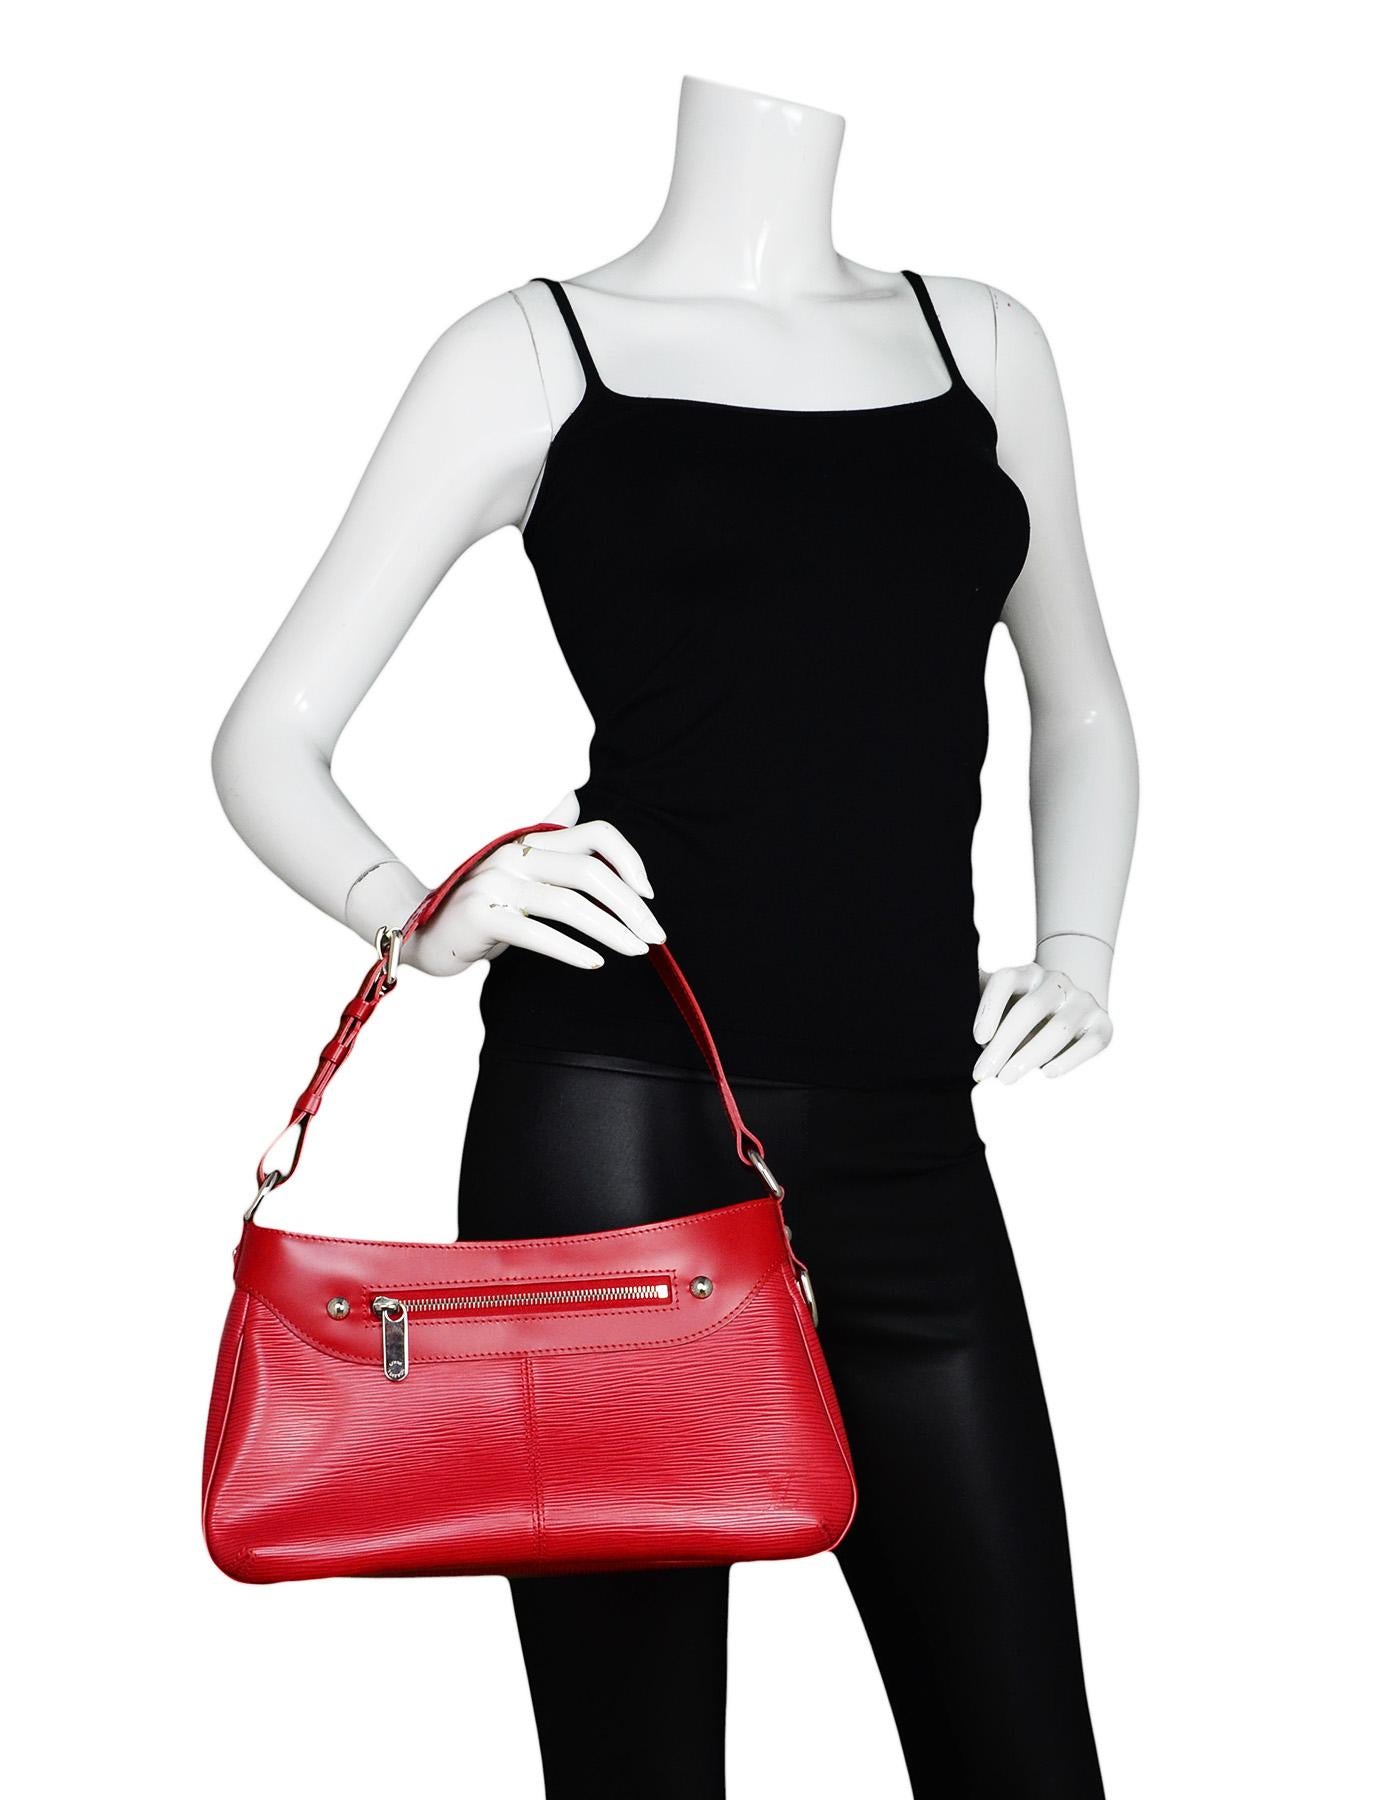 Louis Vuitton Turenne PM NM Red EPI Leather Zipper Front Shoulder Bag

Made In: France
Year of Production: 2006
Color: Red
Hardware: Silvertone
Materials: EPI Leather
Lining: Red textile
Closure/Opening: Zipper top
Exterior Pockets: Front zipper